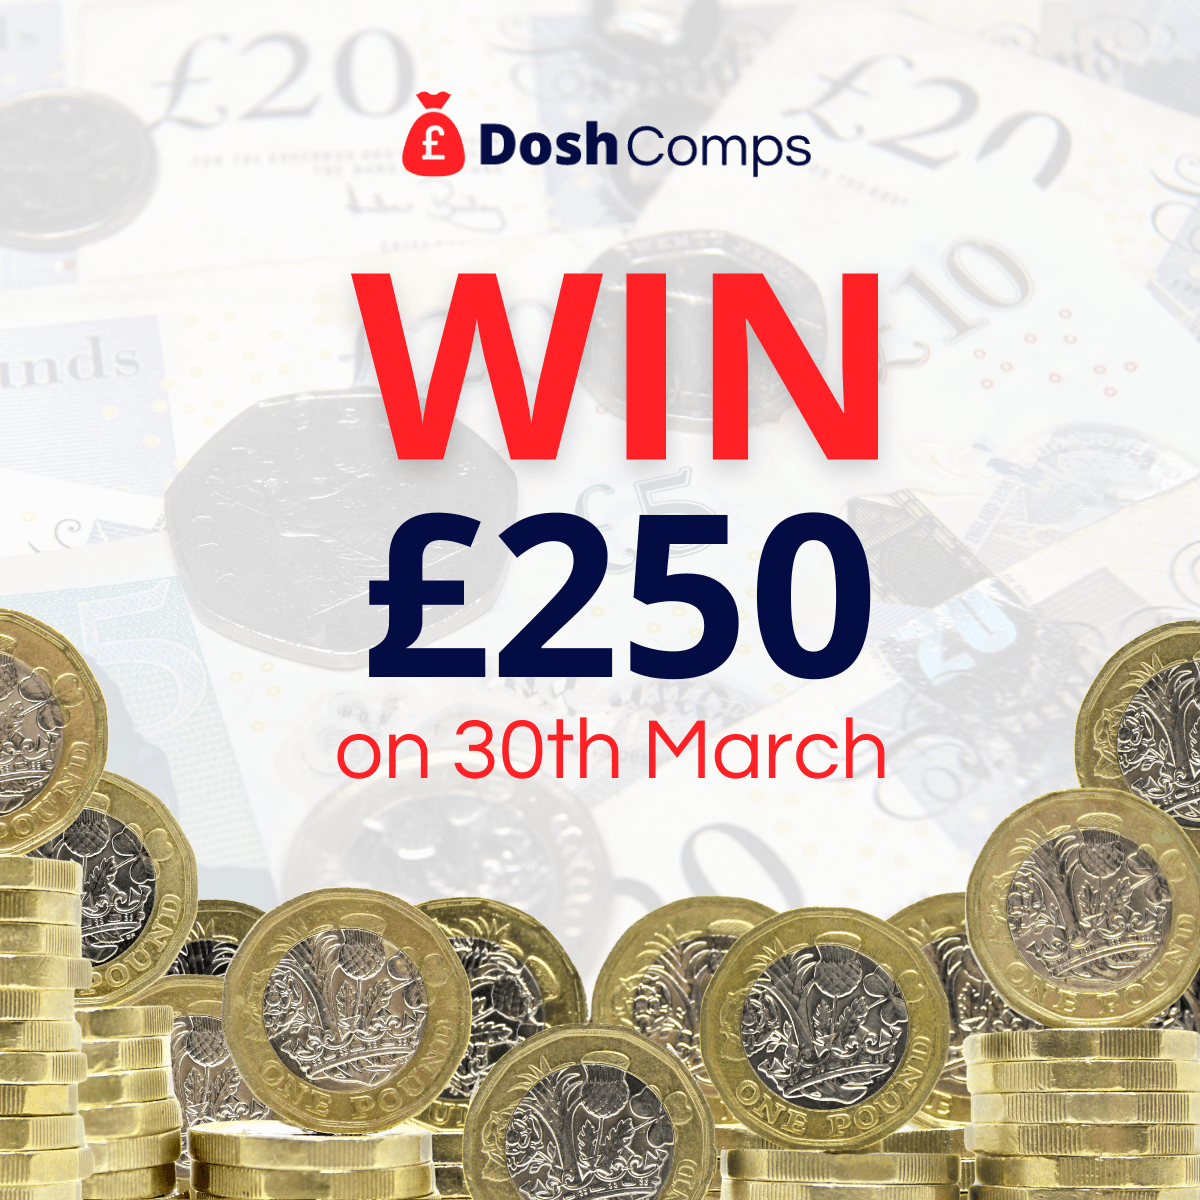 Win £250 for just 99p! 😀 Get in early. 👍 Tickets at 👉 doshcomps.co.uk #prizes #prizesuk #prizedraw #prizewinner #prizegiveway #winners #competitionuk #prizesuk #win #doshcomps